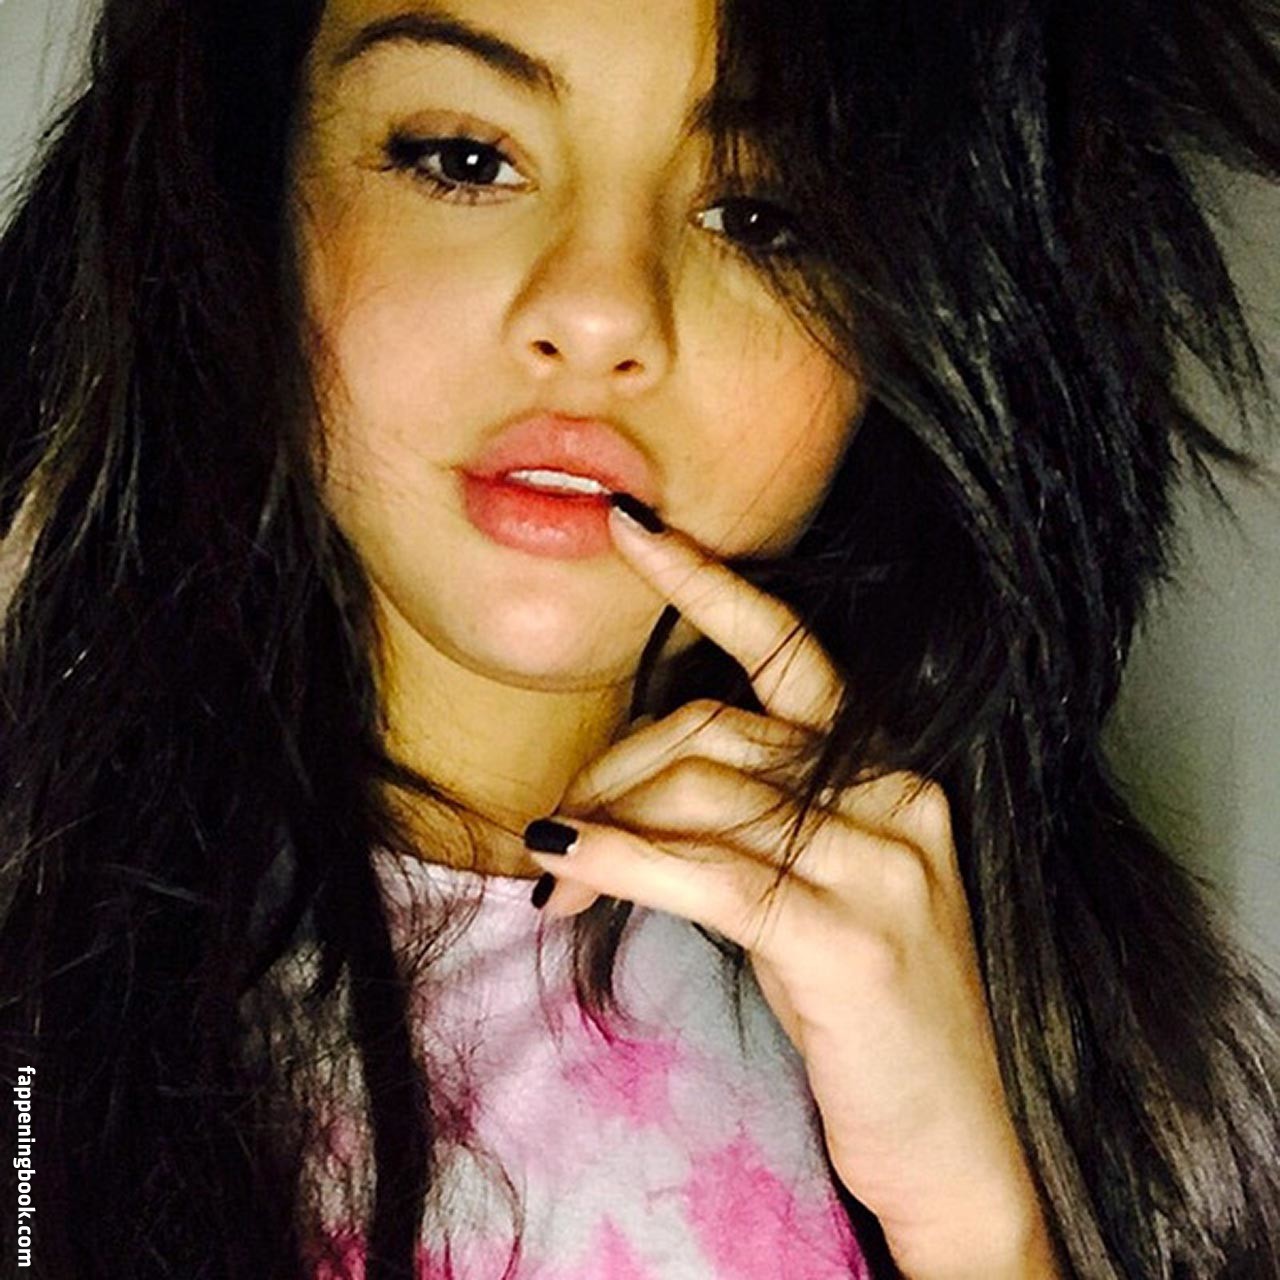 Selena Gomez Is a Rare Beauty in a Bikini! See Her Best Swimsuit Photos